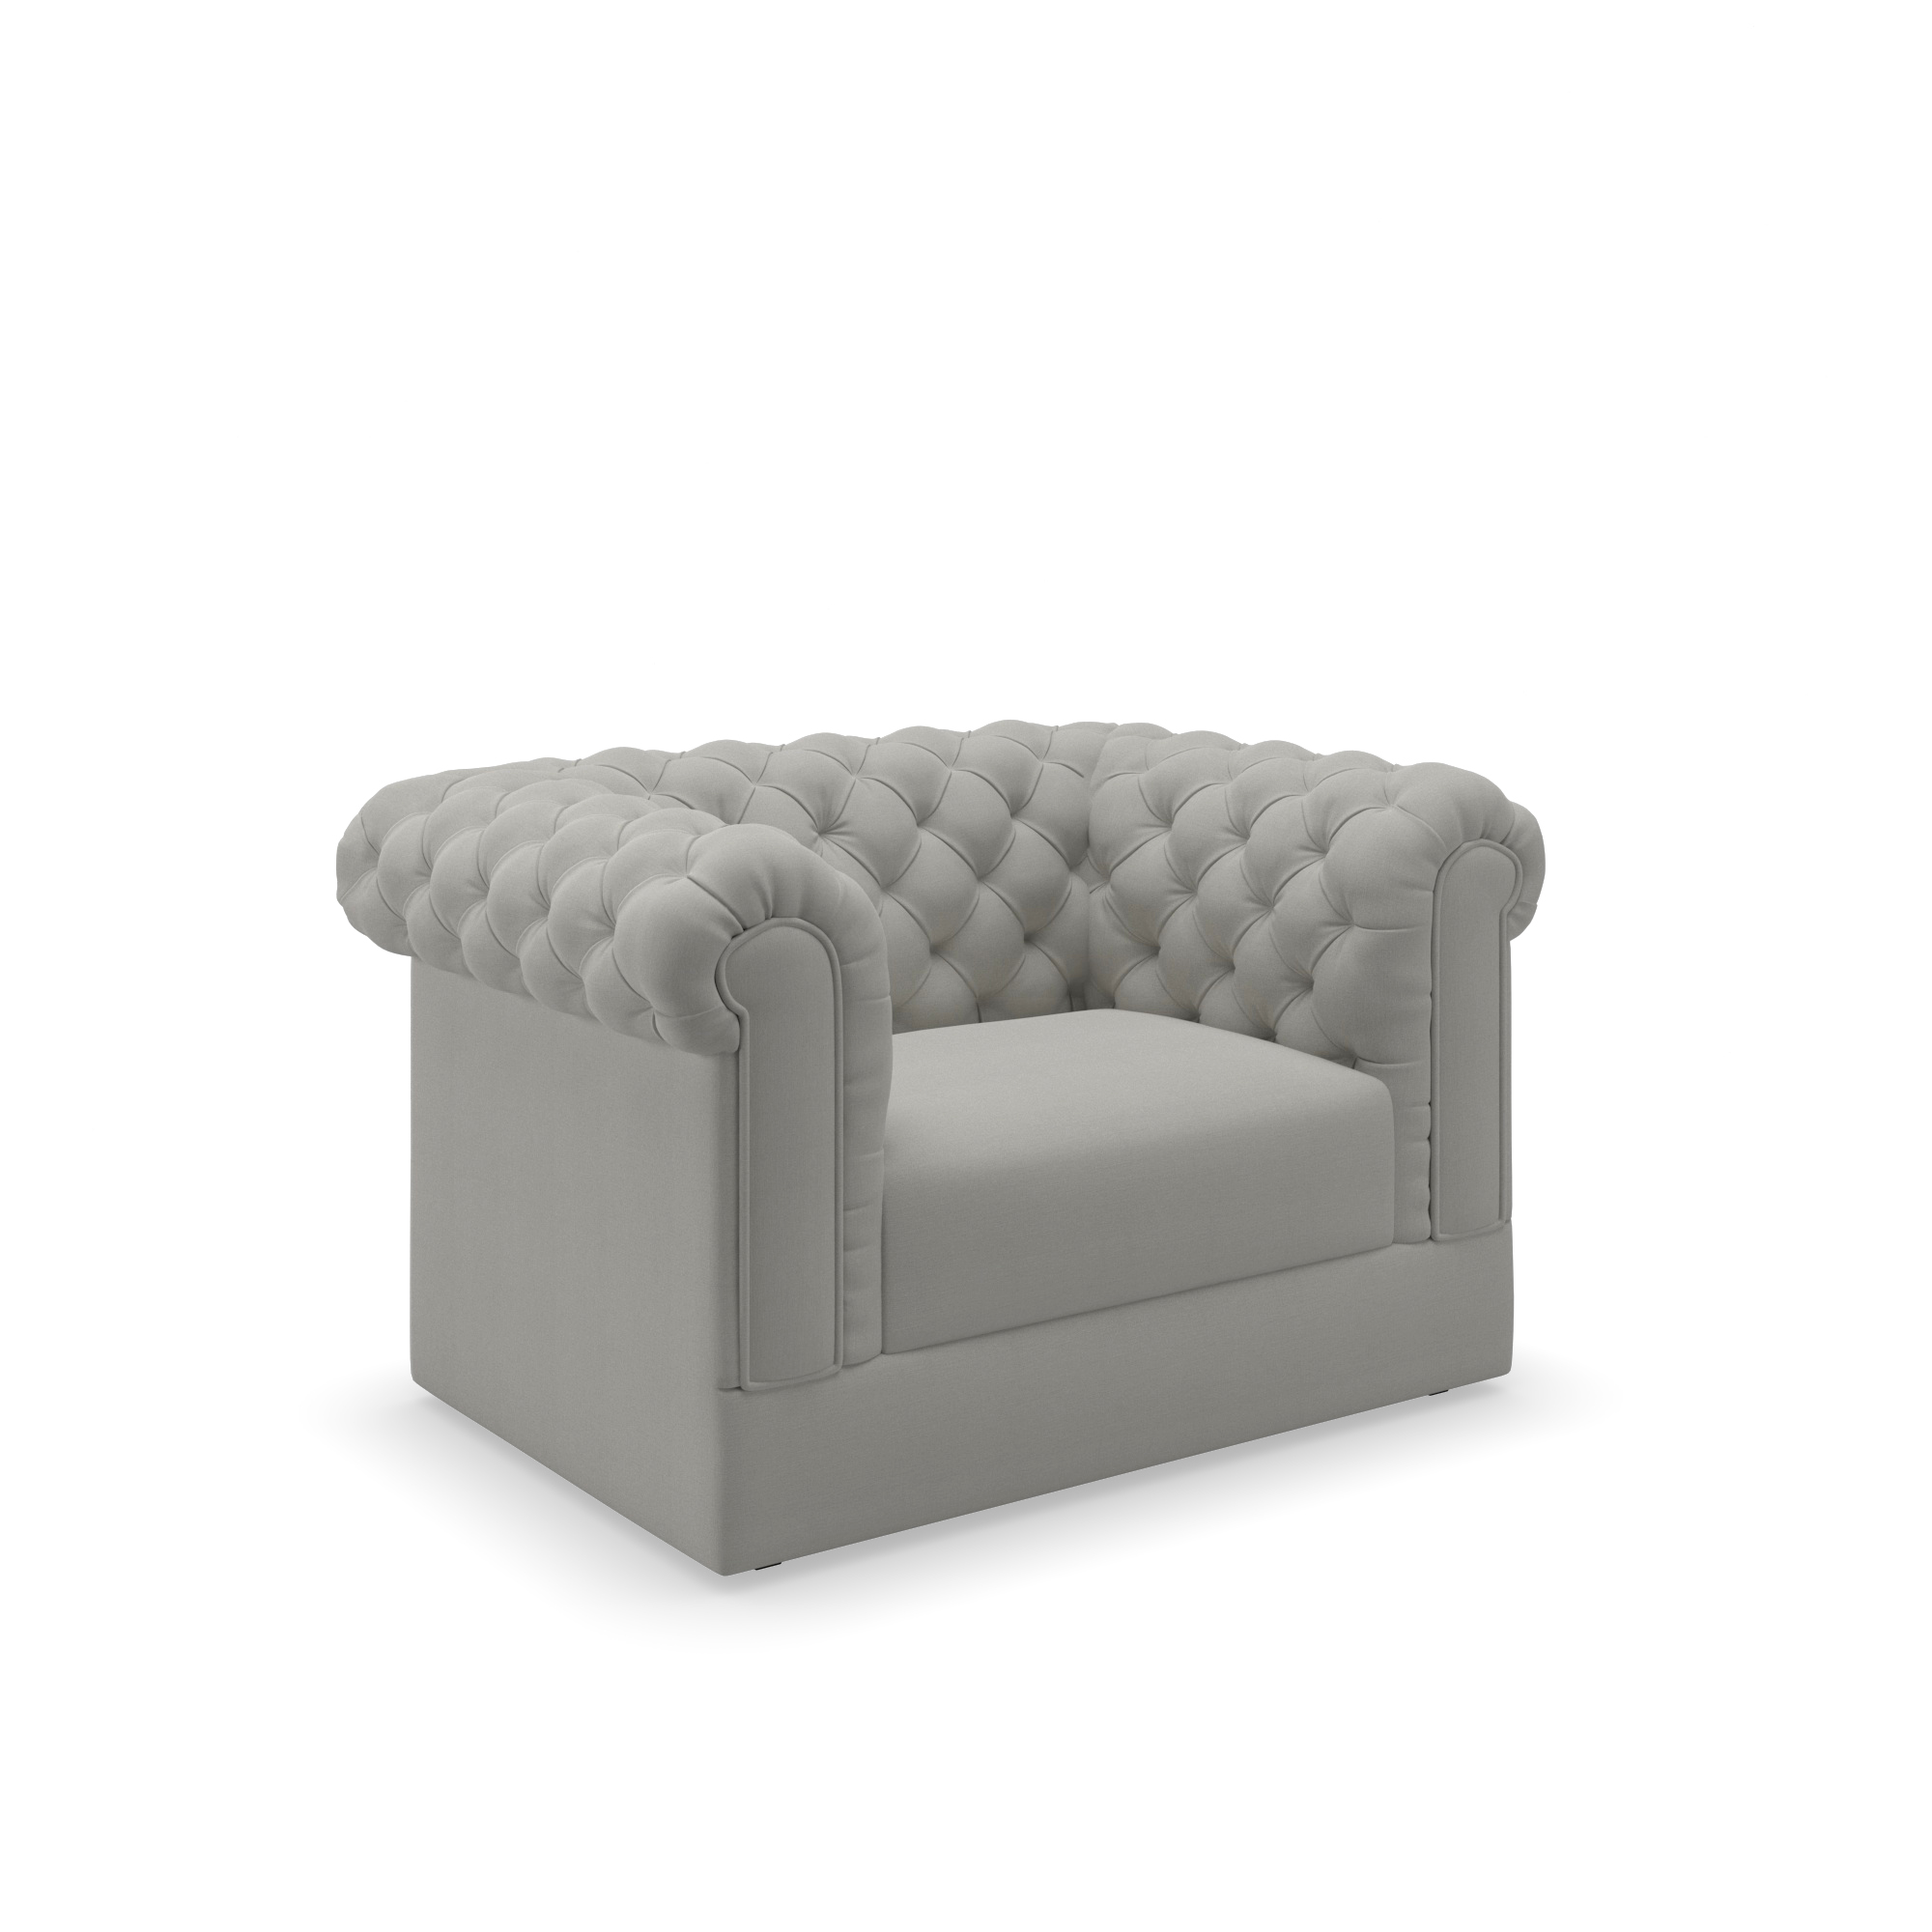 Westchester chair with diamond tufting and french roll arms